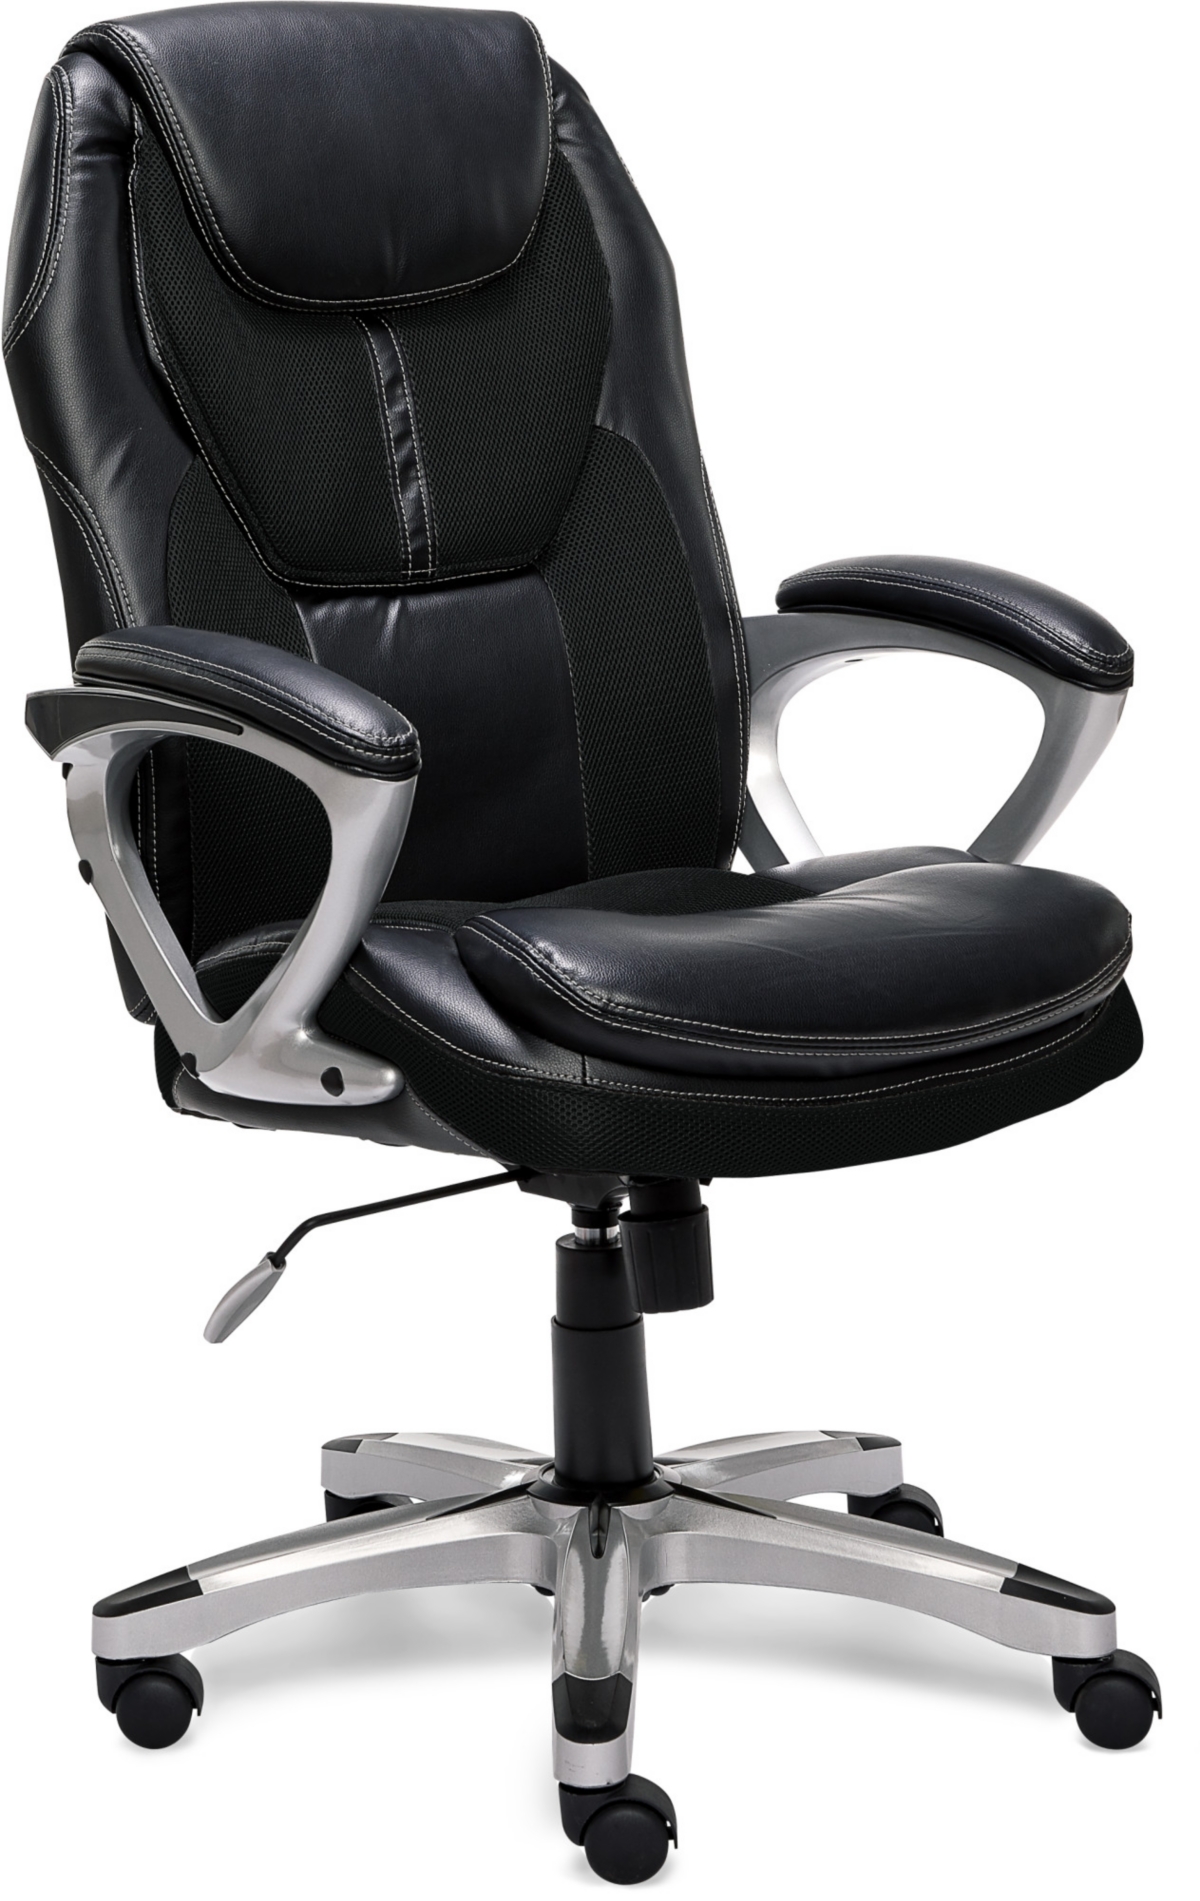 Serta Works Executive Office Chair In Black